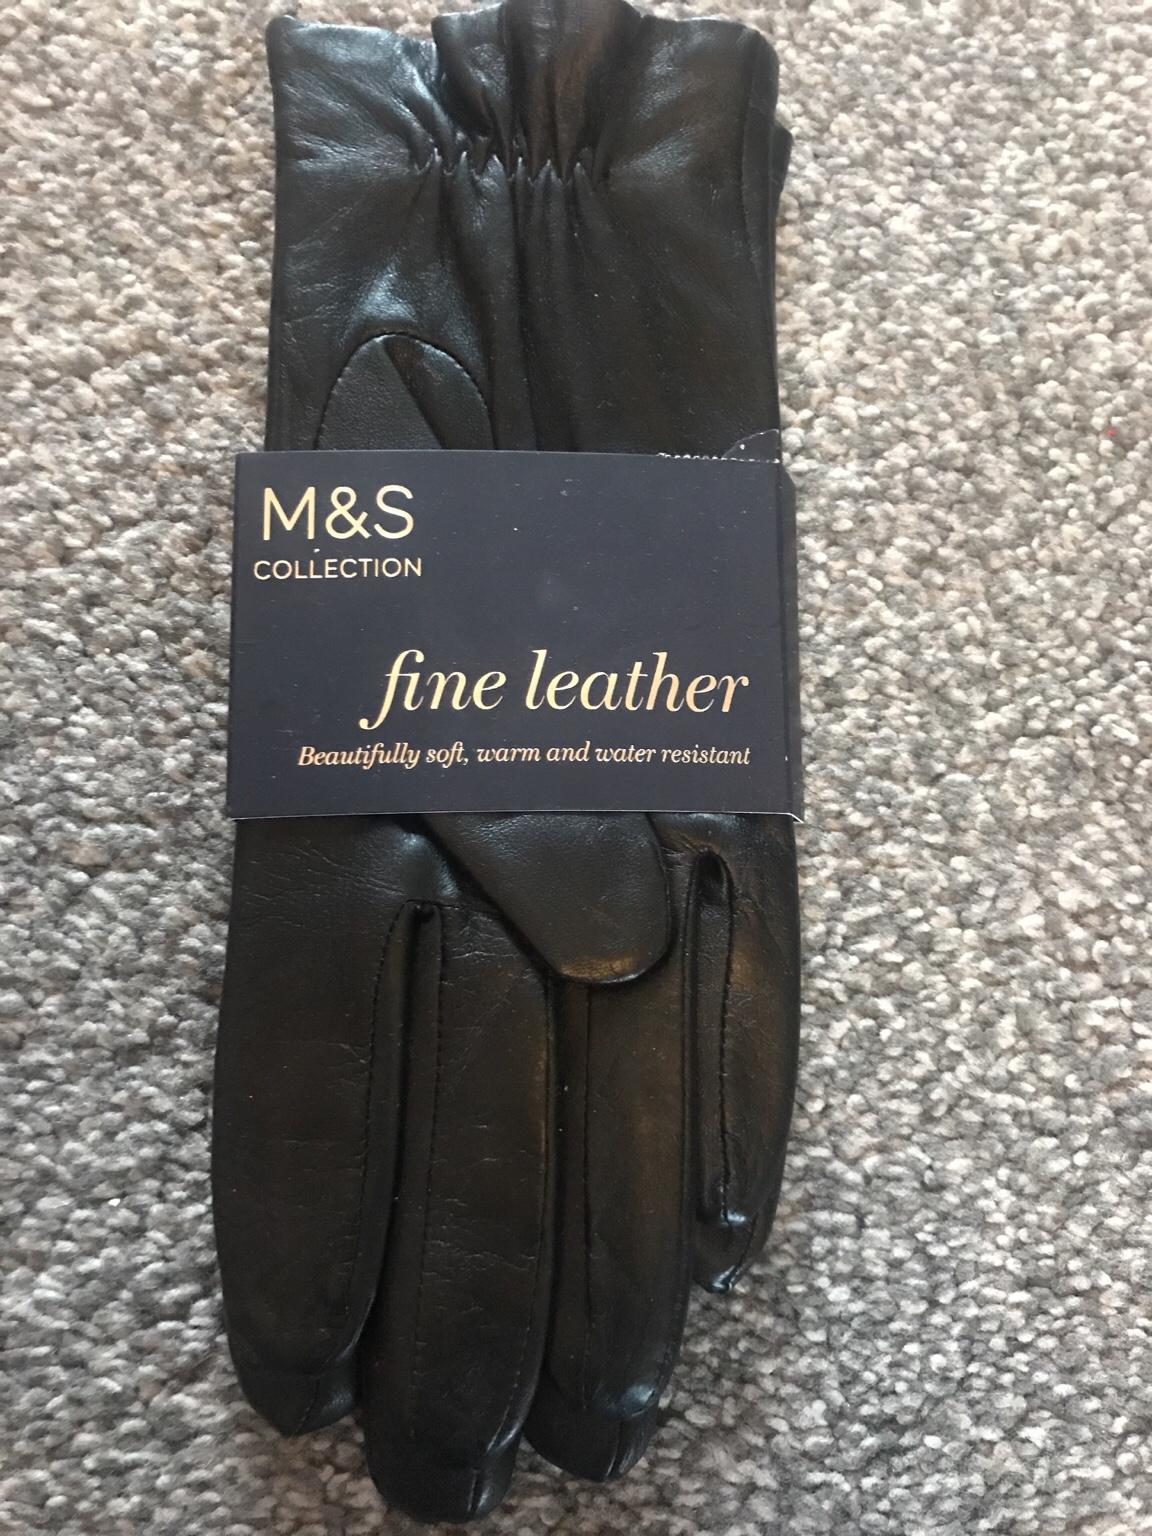 M&S Collection Purple Leather Gloves Soft Warm And Water Resistant Size M 